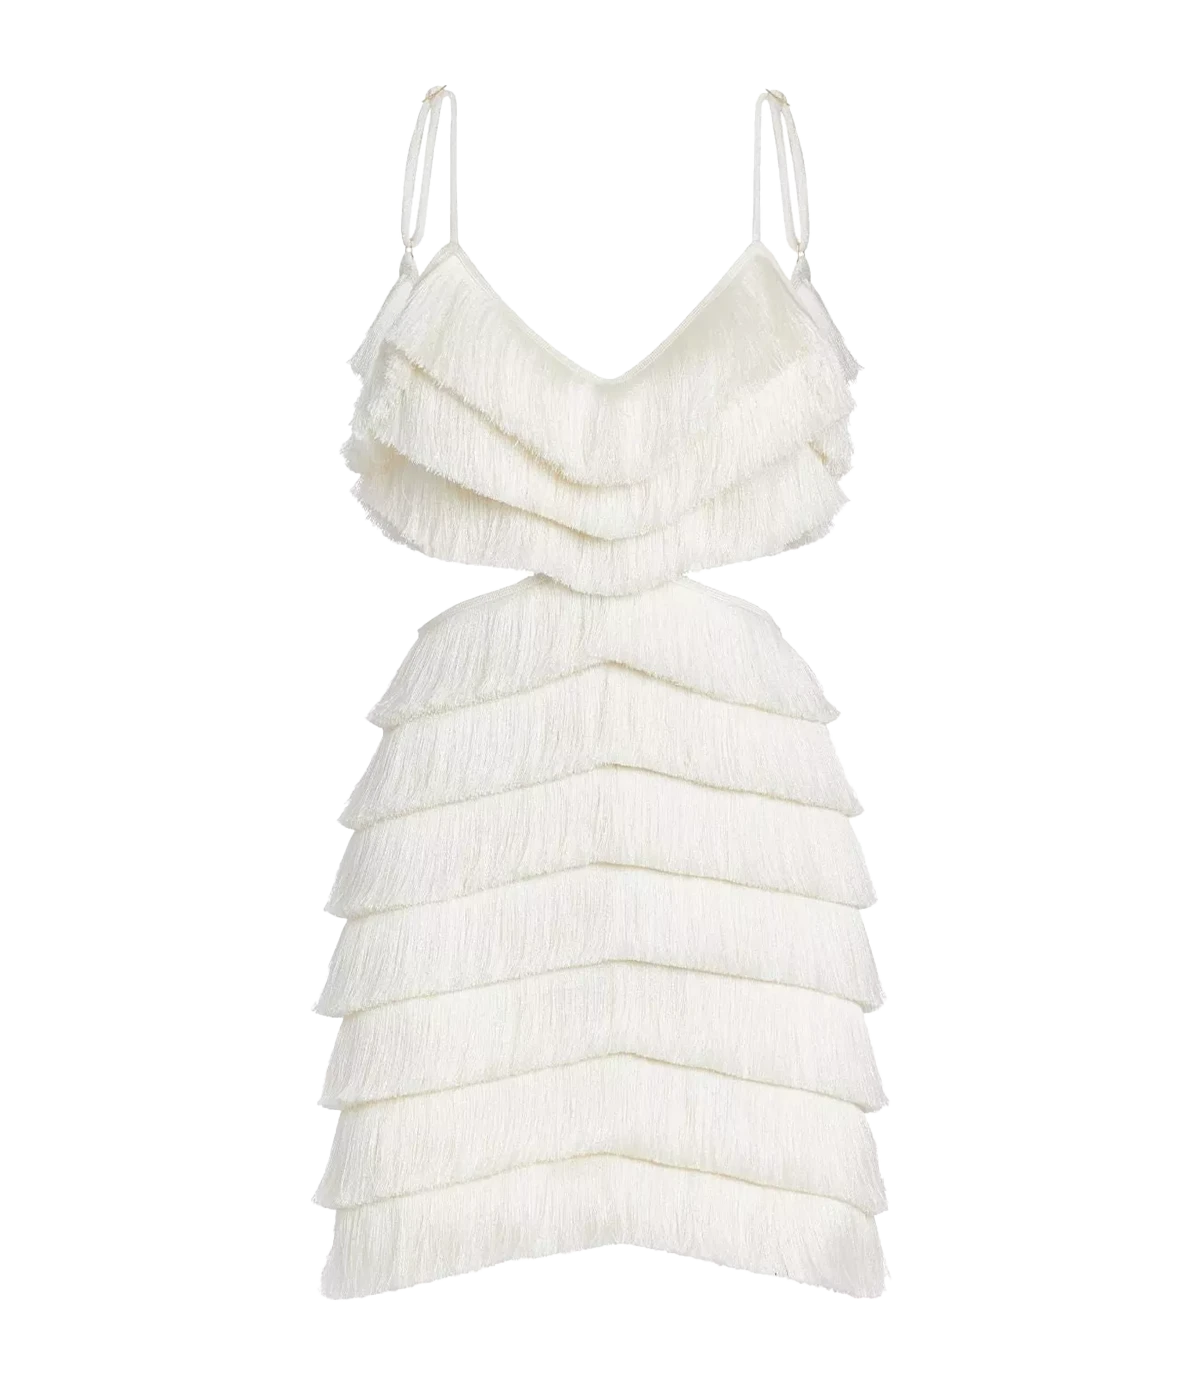 A hand crafted fringe mini dress, with adjustable spaghettis straps, two side cut outs and low back detailing. Date night outfit, sexy mini dress, boat party, made internationally.  